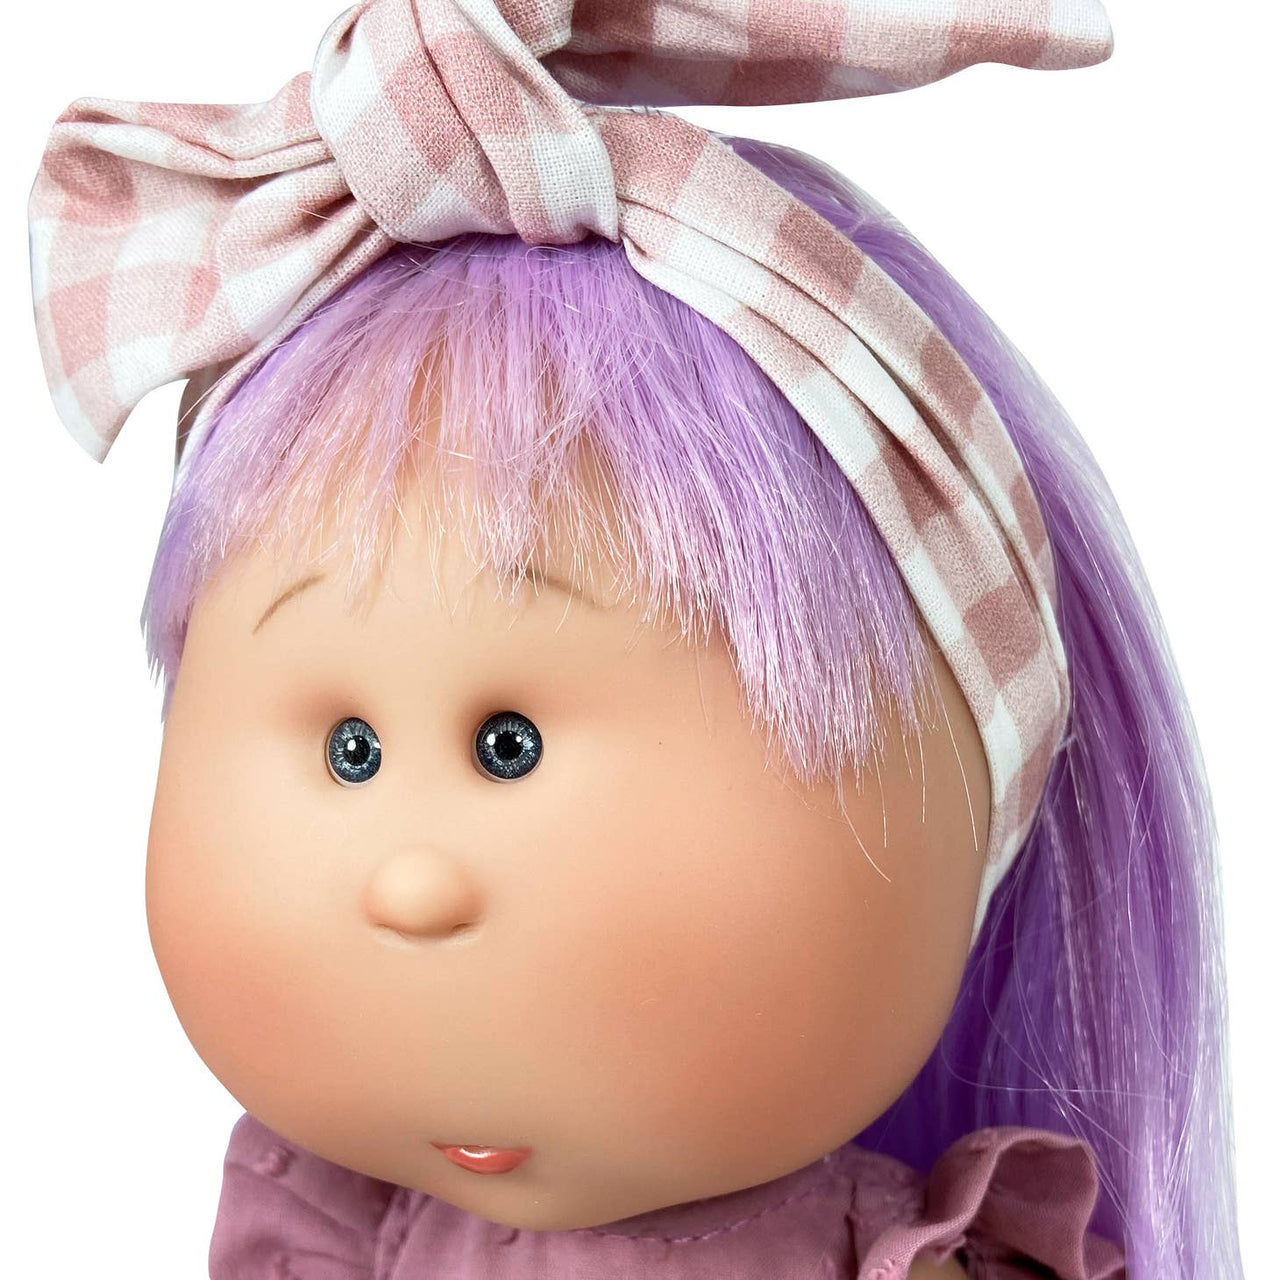 Lilla - Fully Dressed Mia Doll with Lavender Purple Hair